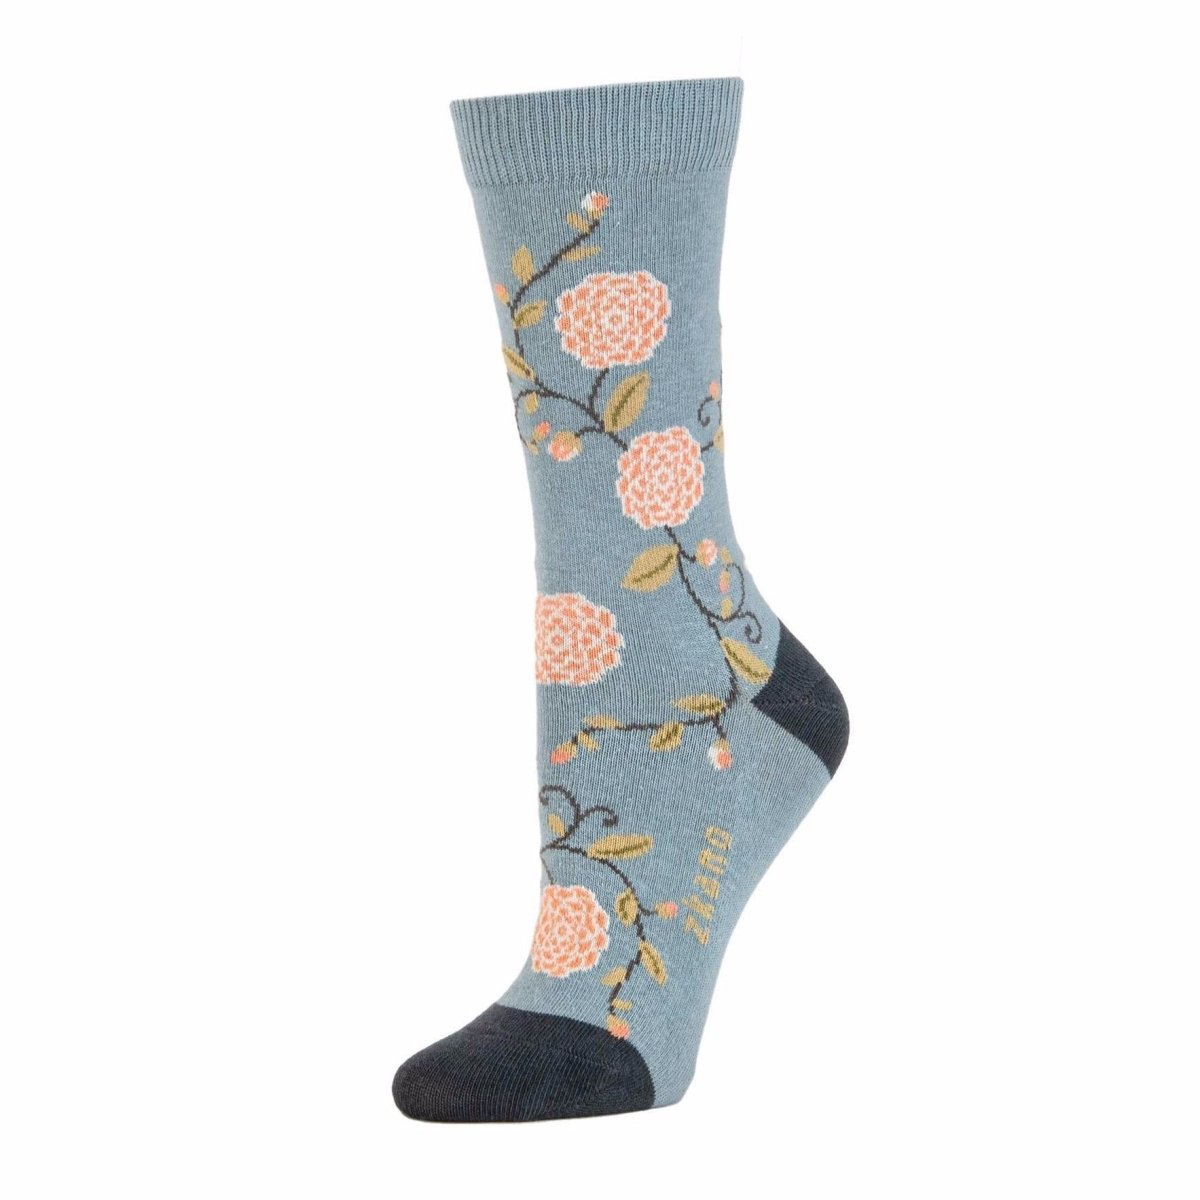 Light blue sock with light pink and green floral pattern as well as navy colored heel and toe accent. The Camilla Floral Crew Sock in Lead is from Zkano and made in Alabama, USA.